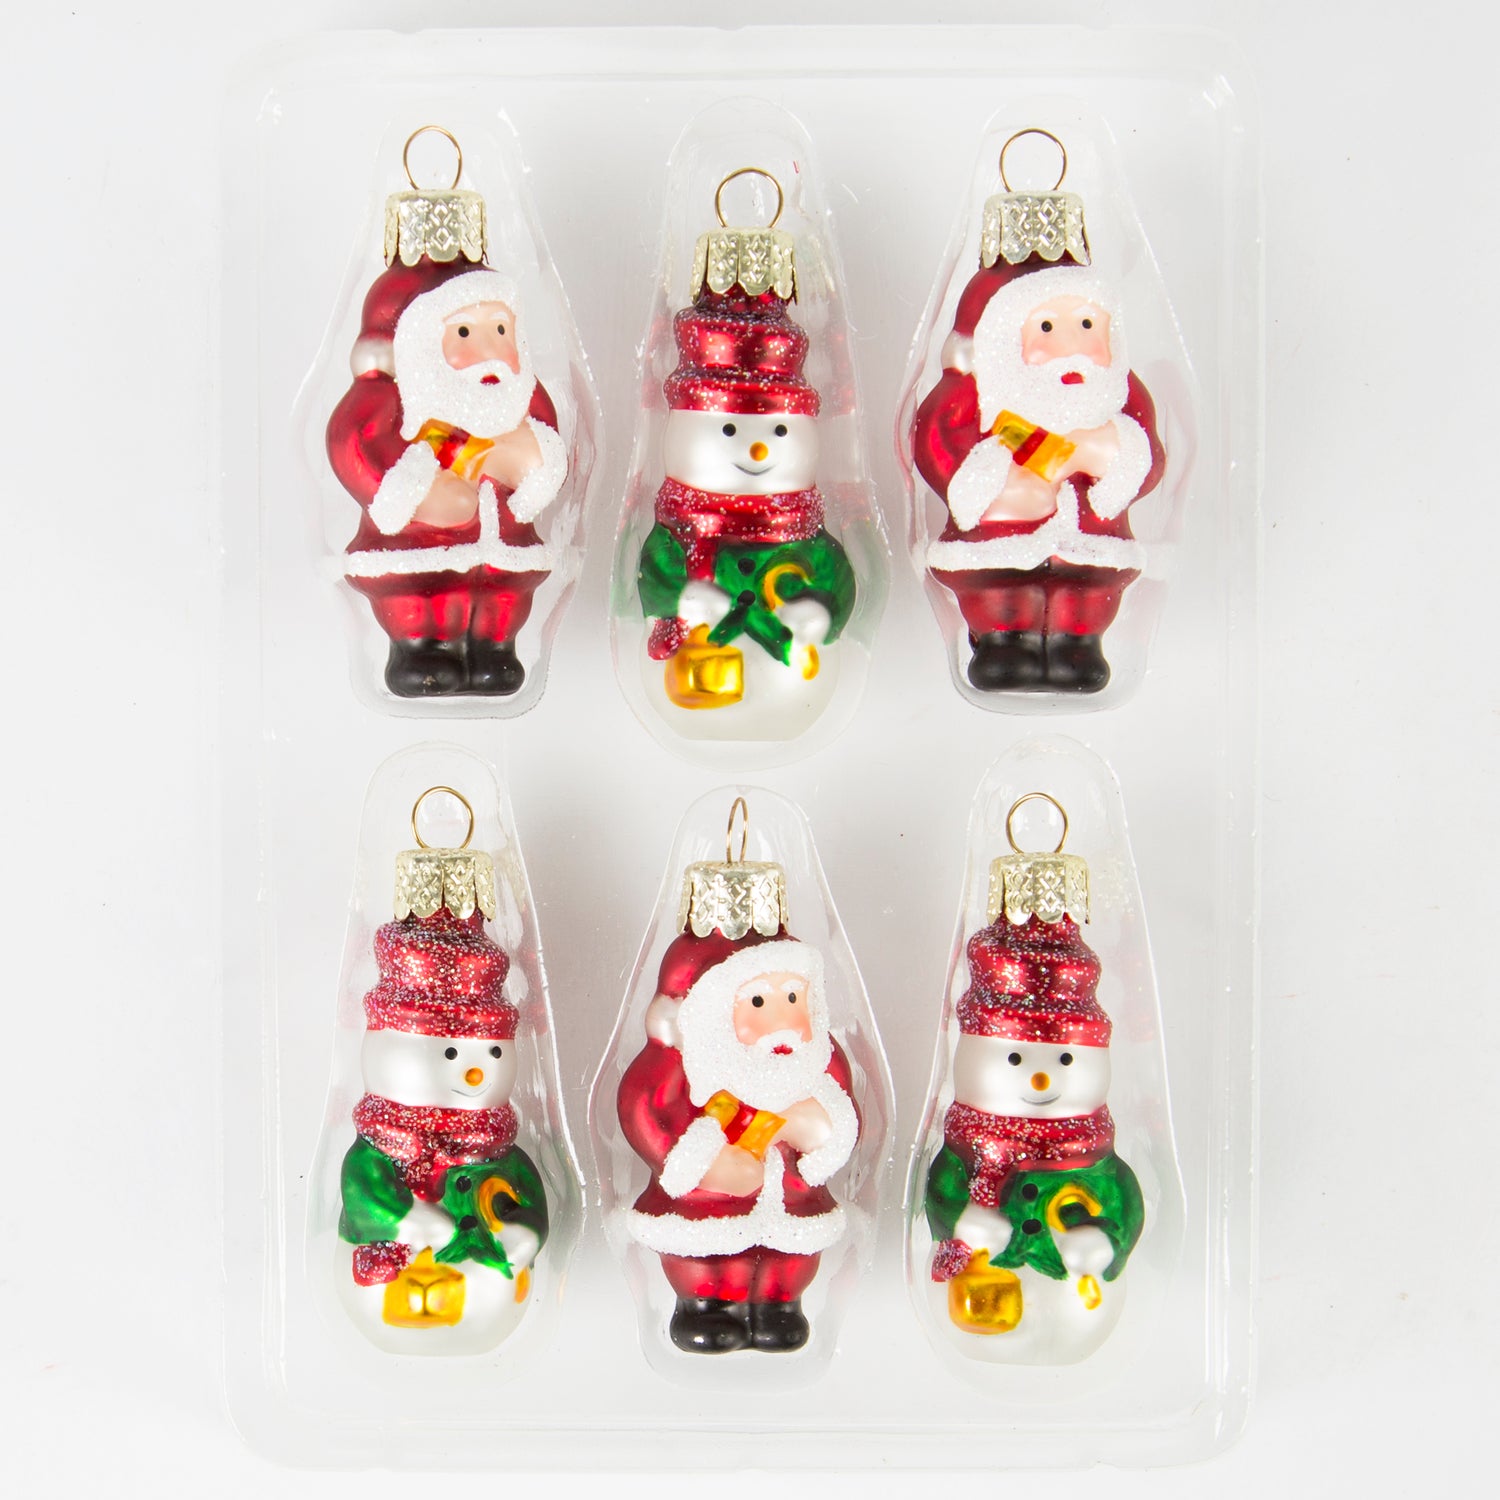 Mini Father Christmas & snowman Christmas tree decorations with glittery detail